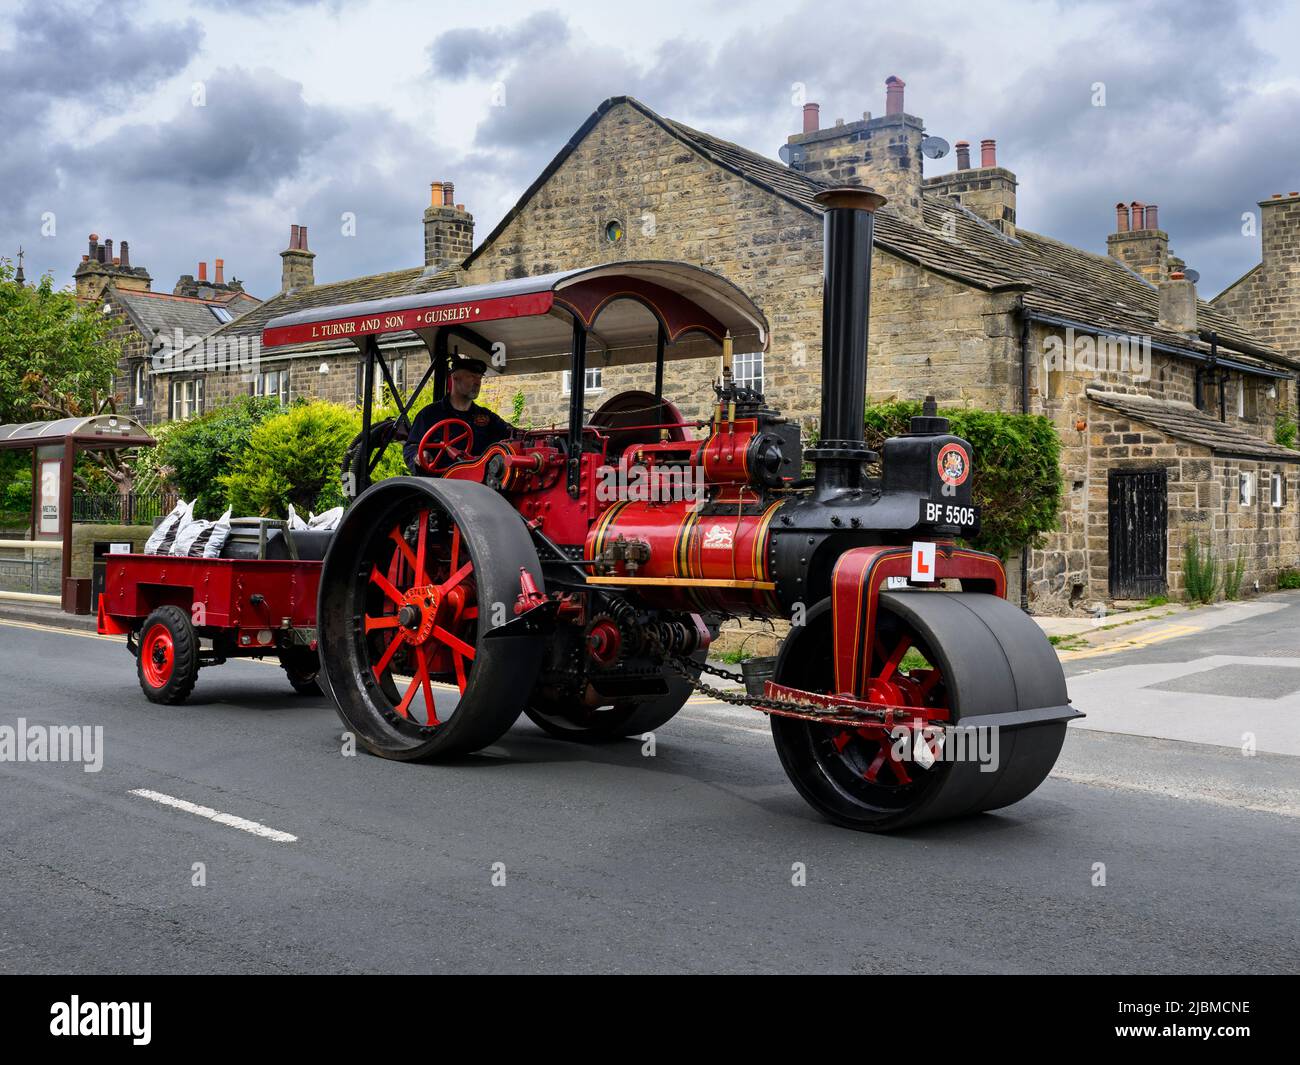 Vintage restored heavy old-fashioned red steam-powered vehicle (black chimney, L-plate, driver) - Burley-in-Wharfedale, West Yorkshire, England, UK. Stock Photo